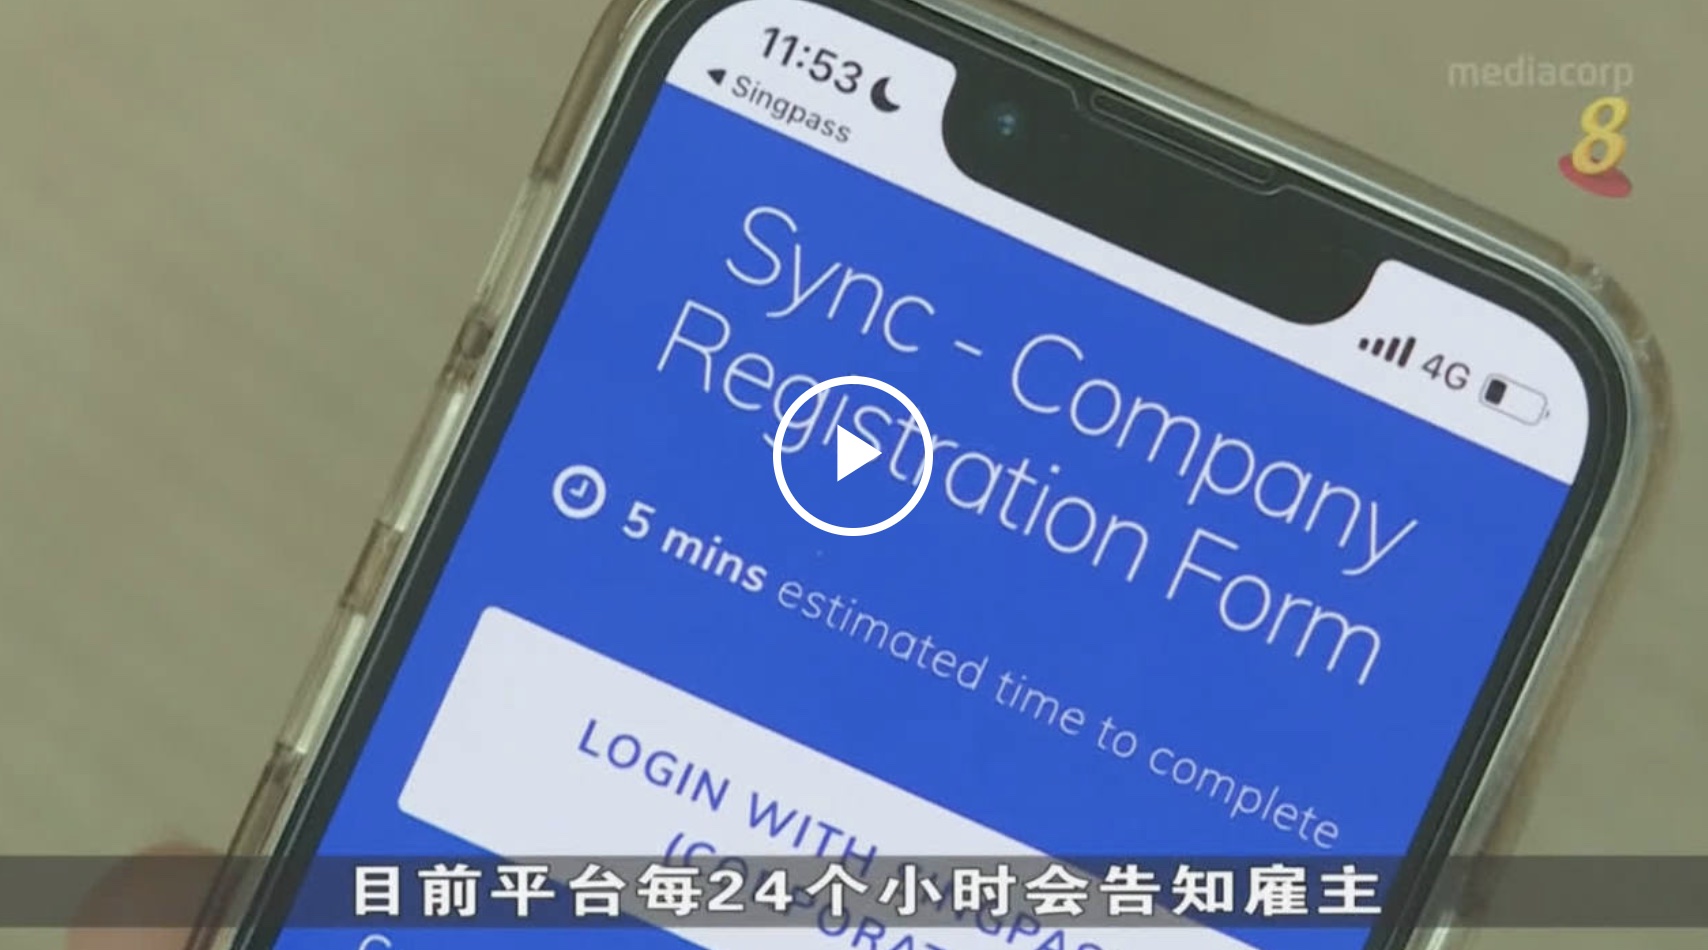 LAUNCH OF SYNC